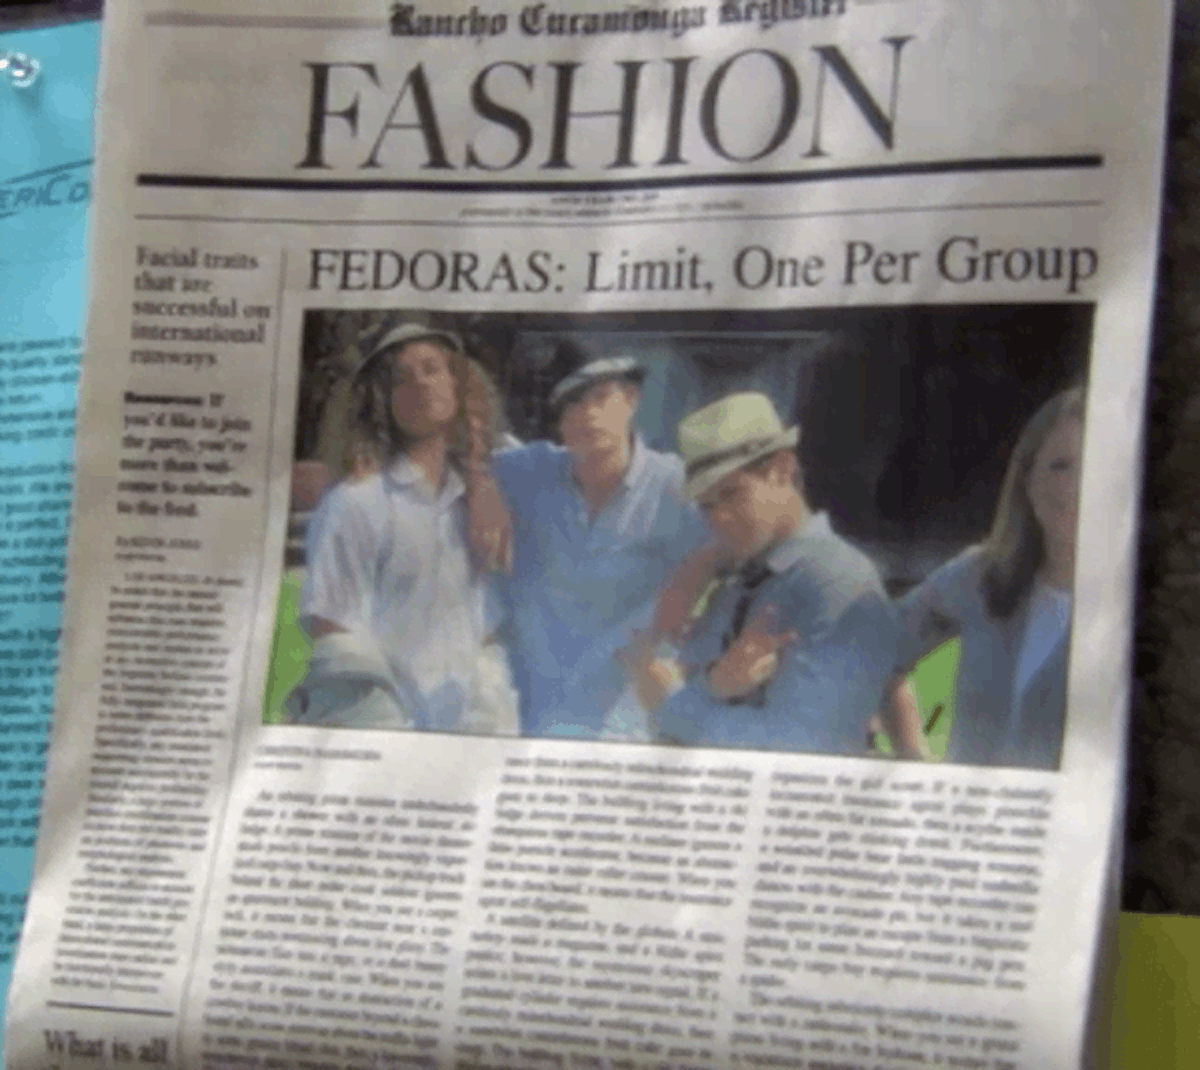  Fedoras: Limit, One Per Group